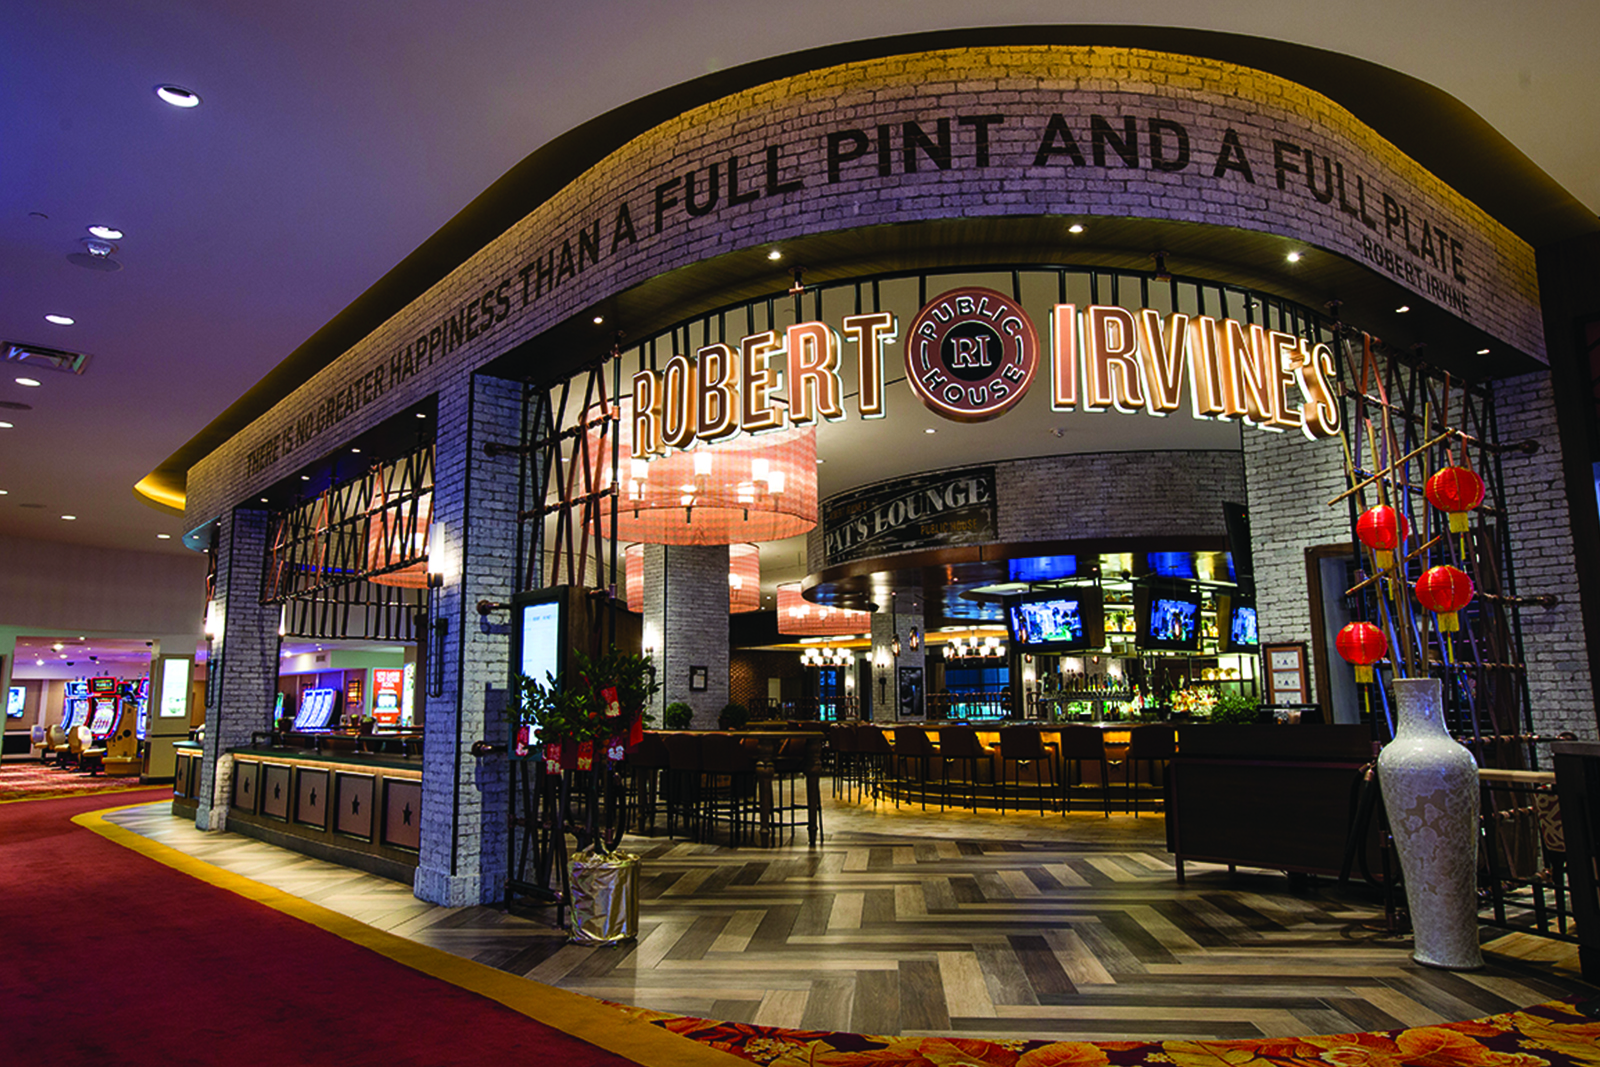 Robert Irvine's Public House  menu, happy hour, summer cookout, and hours.  Located in Tropicana Las Vegas, NV.